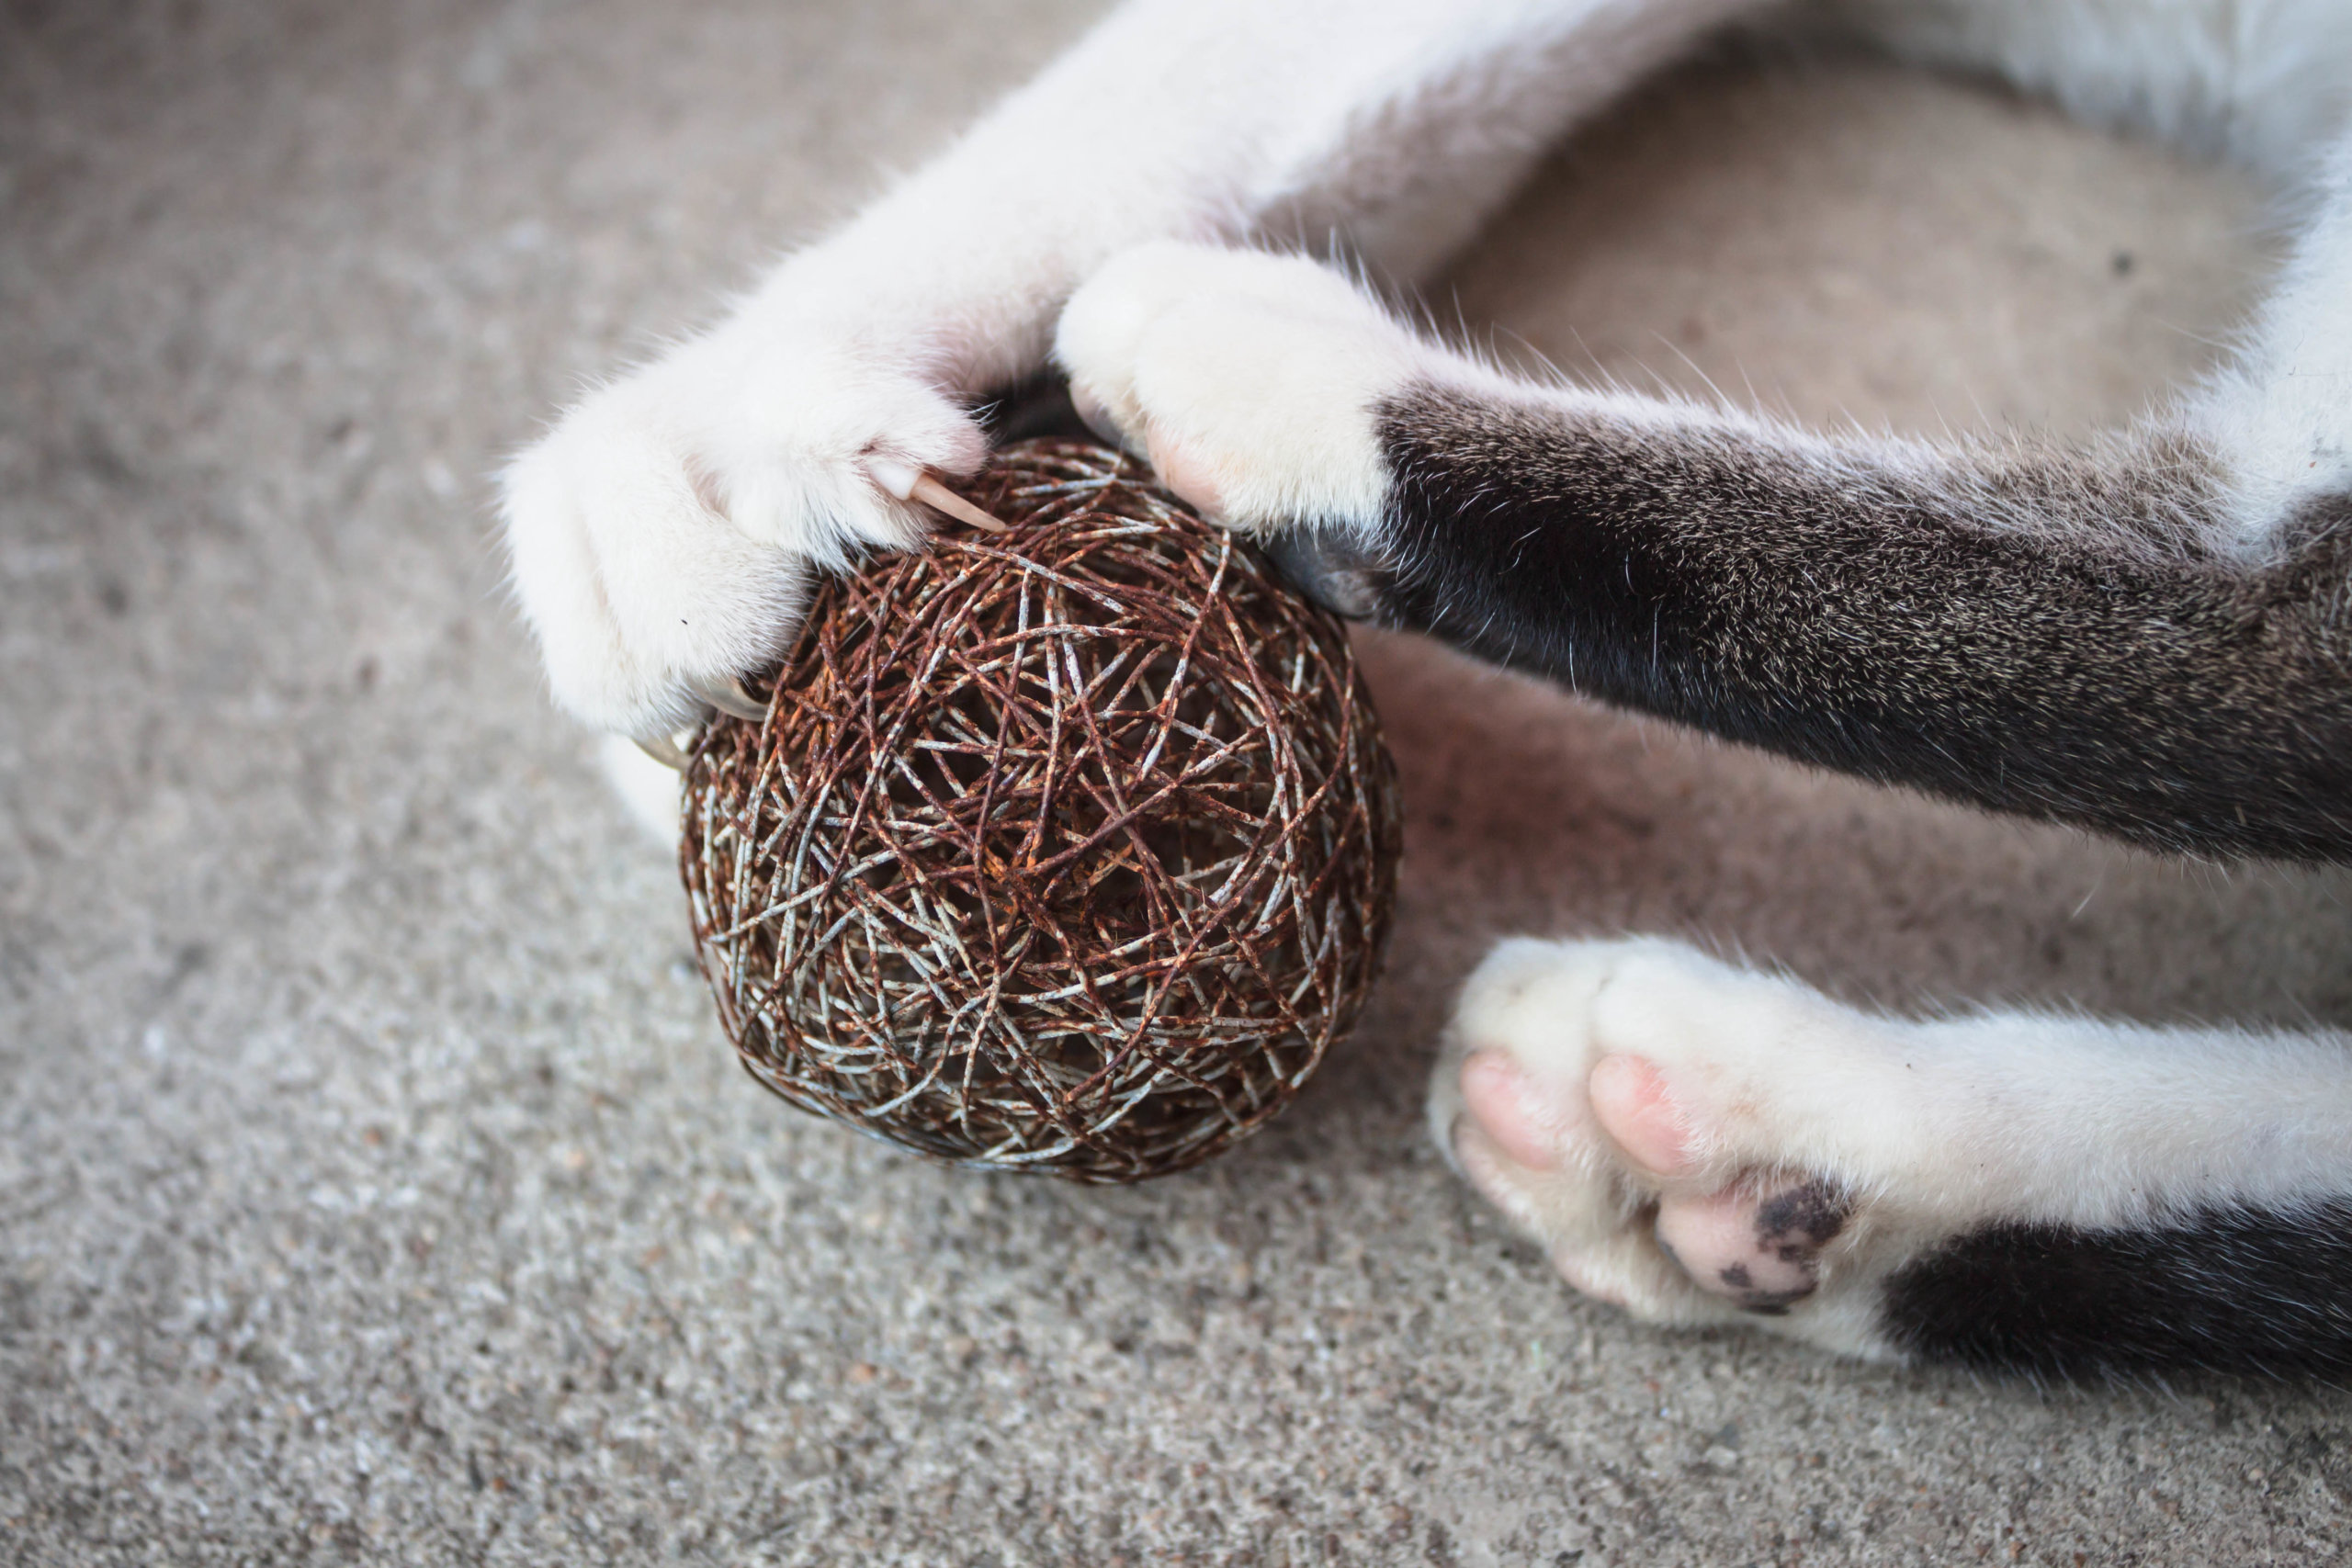 alternatives to cat declawing